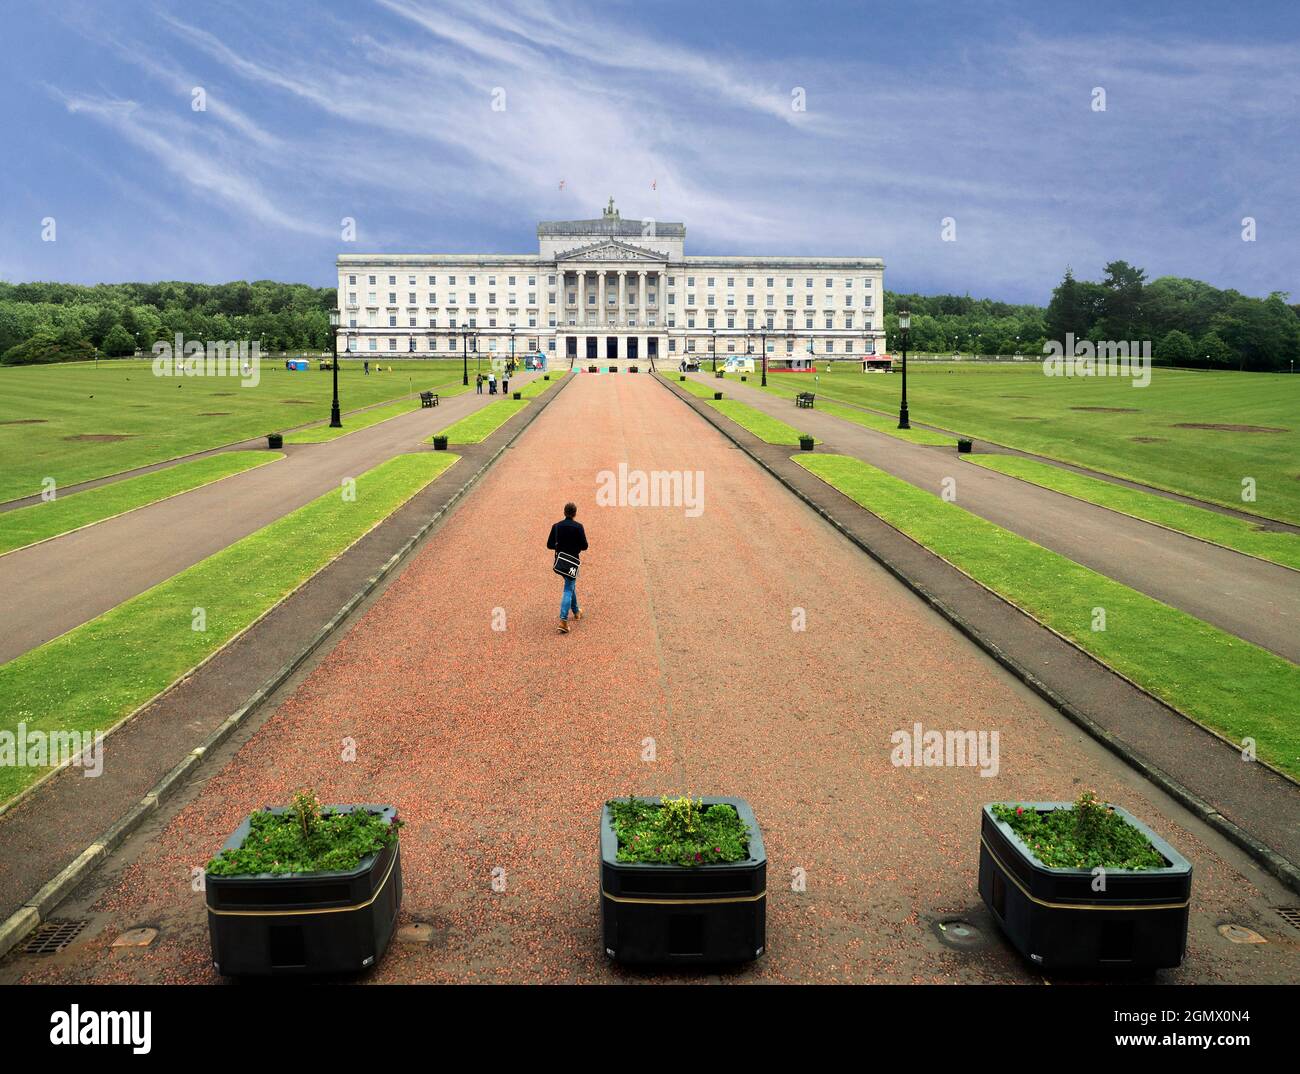 The Northern Ireland Parliament Building is commonly known as Stormont, because of its location in the Stormont Estate area of Belfast. Previously hou Stock Photo